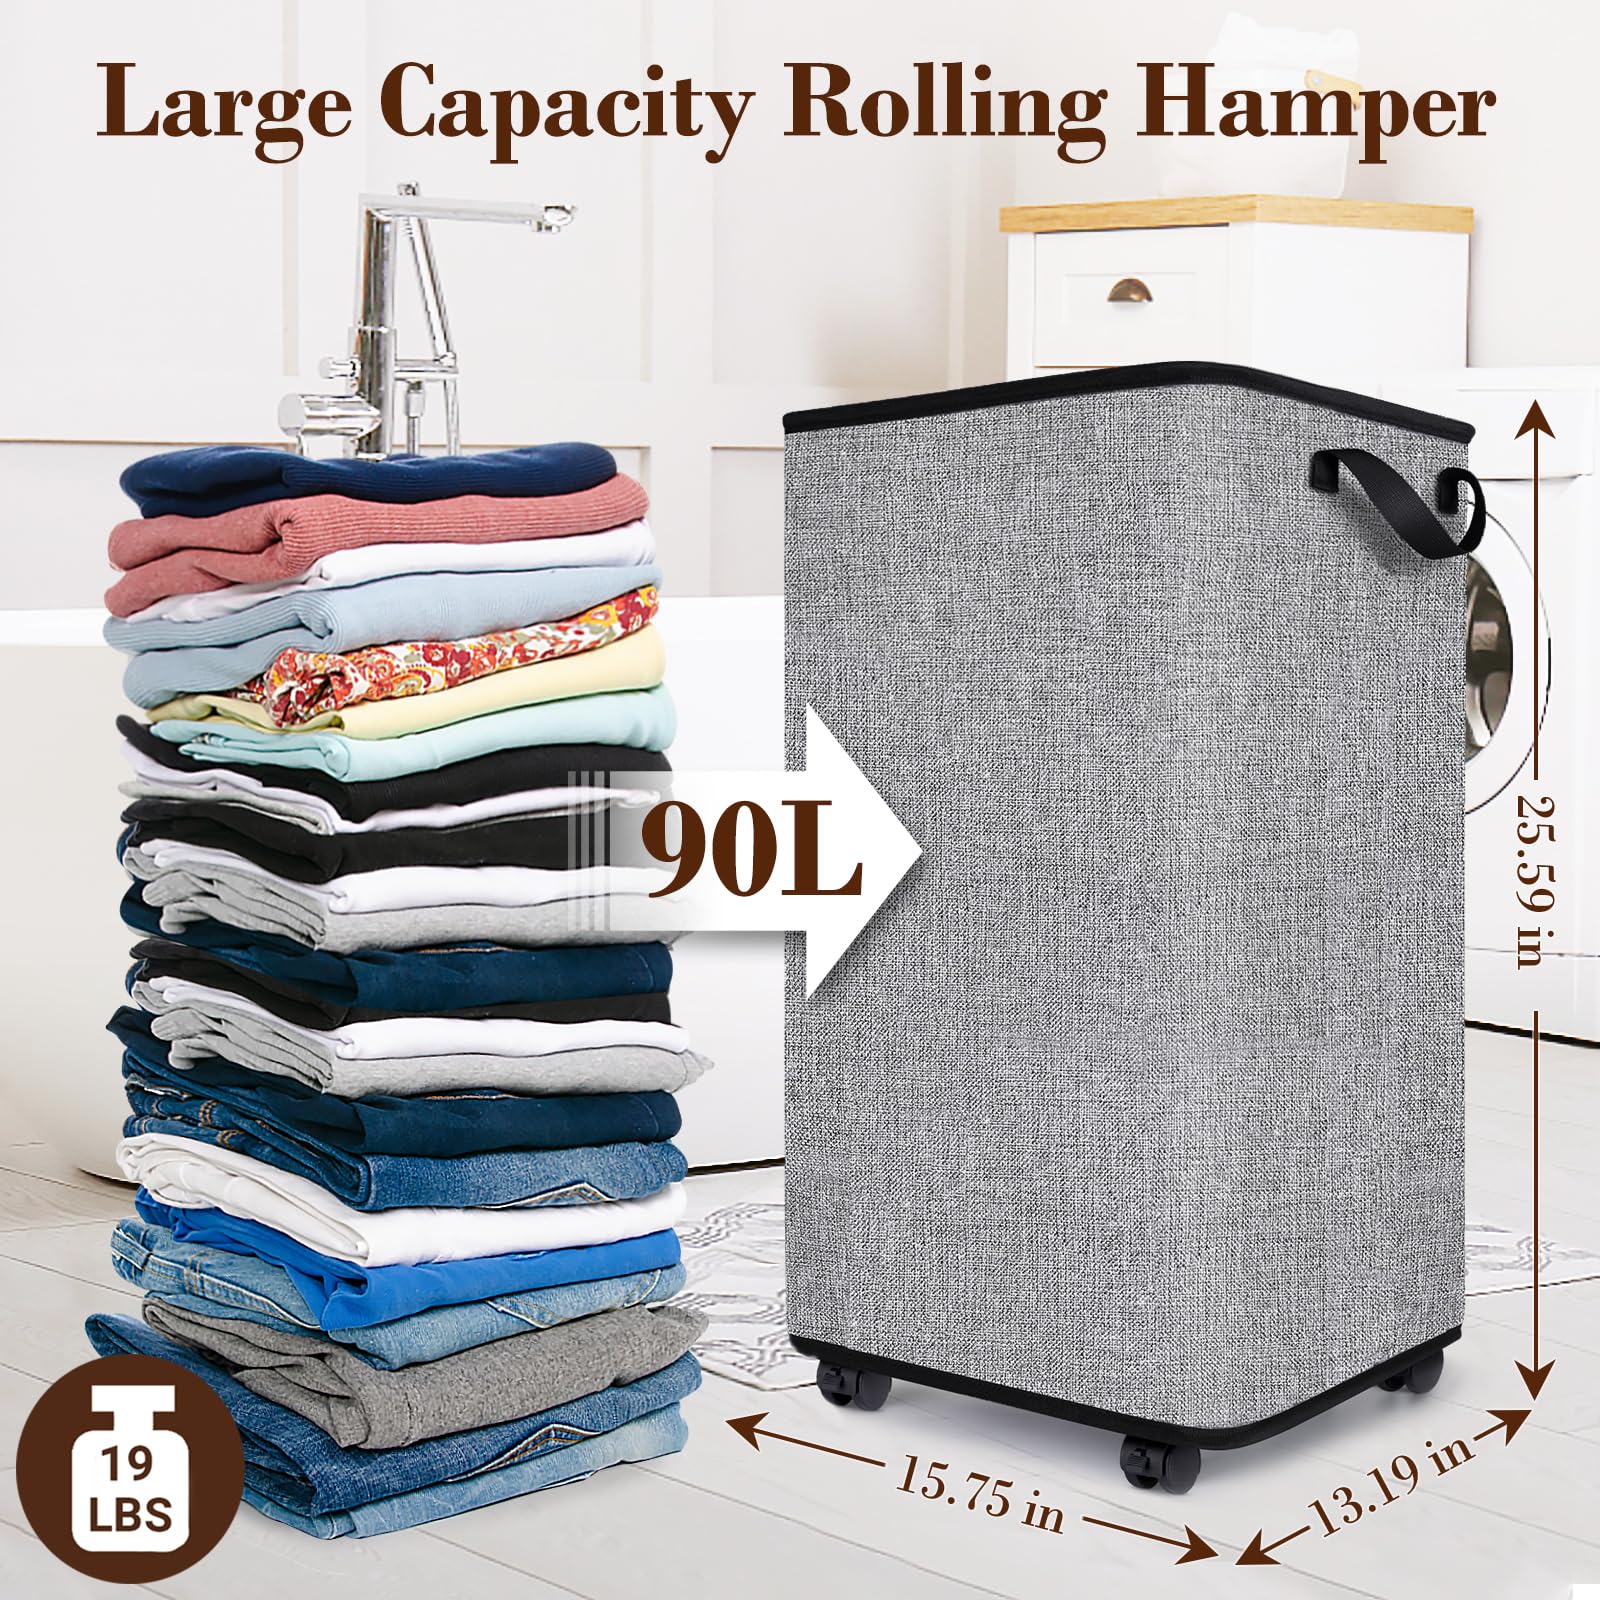 PHESWISOM 90L Large Rolling Laundry Hamper, Laundry Basket with Wheels and Handle for Storage, Dirty Clothes Hamper for Laundry, Tall Laundry Basket, Collapsible Laundry Hamper for Bathroom Dorm, Grey